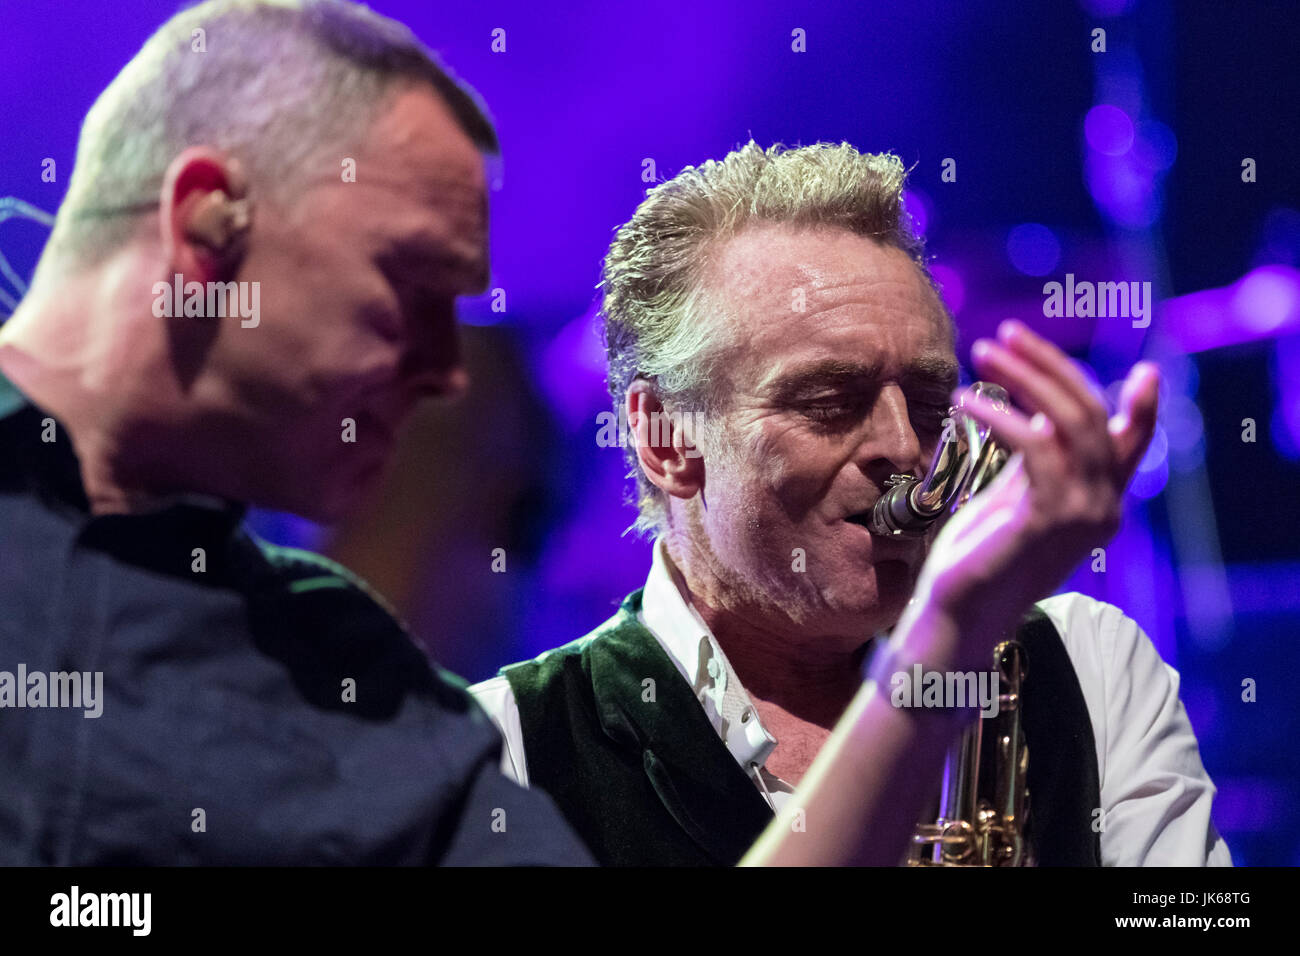 Cartagena, Spain. 21st July, 2017. The British musical group UB40 during their performance at La Mar de Musicas Festival. Credit: ABEL F. ROS/Alamy Live News Stock Photo